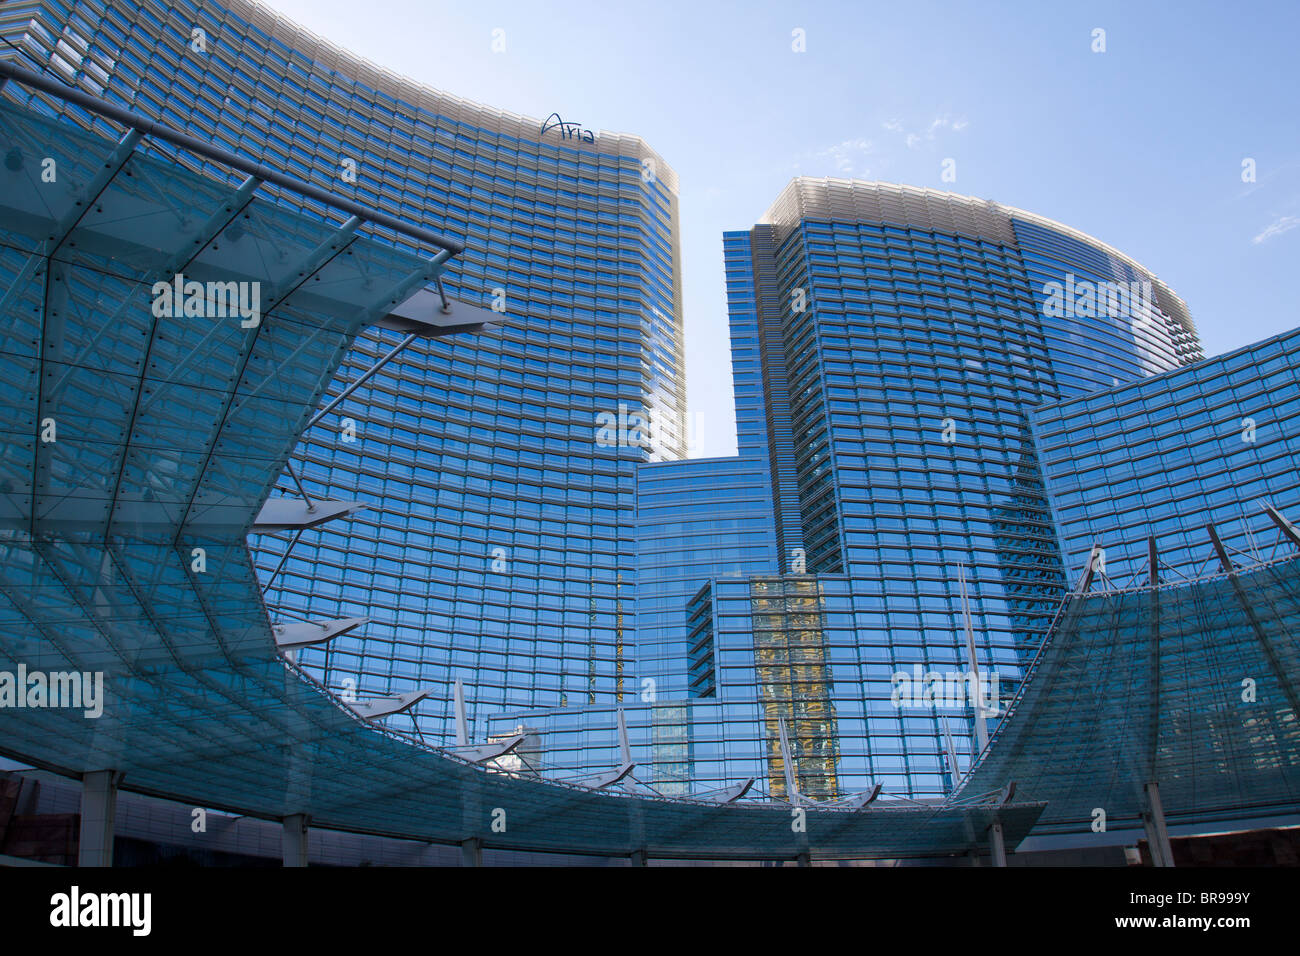 Modern curved glass and steel entrance to the Aria Hotel and Casino in Las Vegas, Nevada, USA Stock Photo